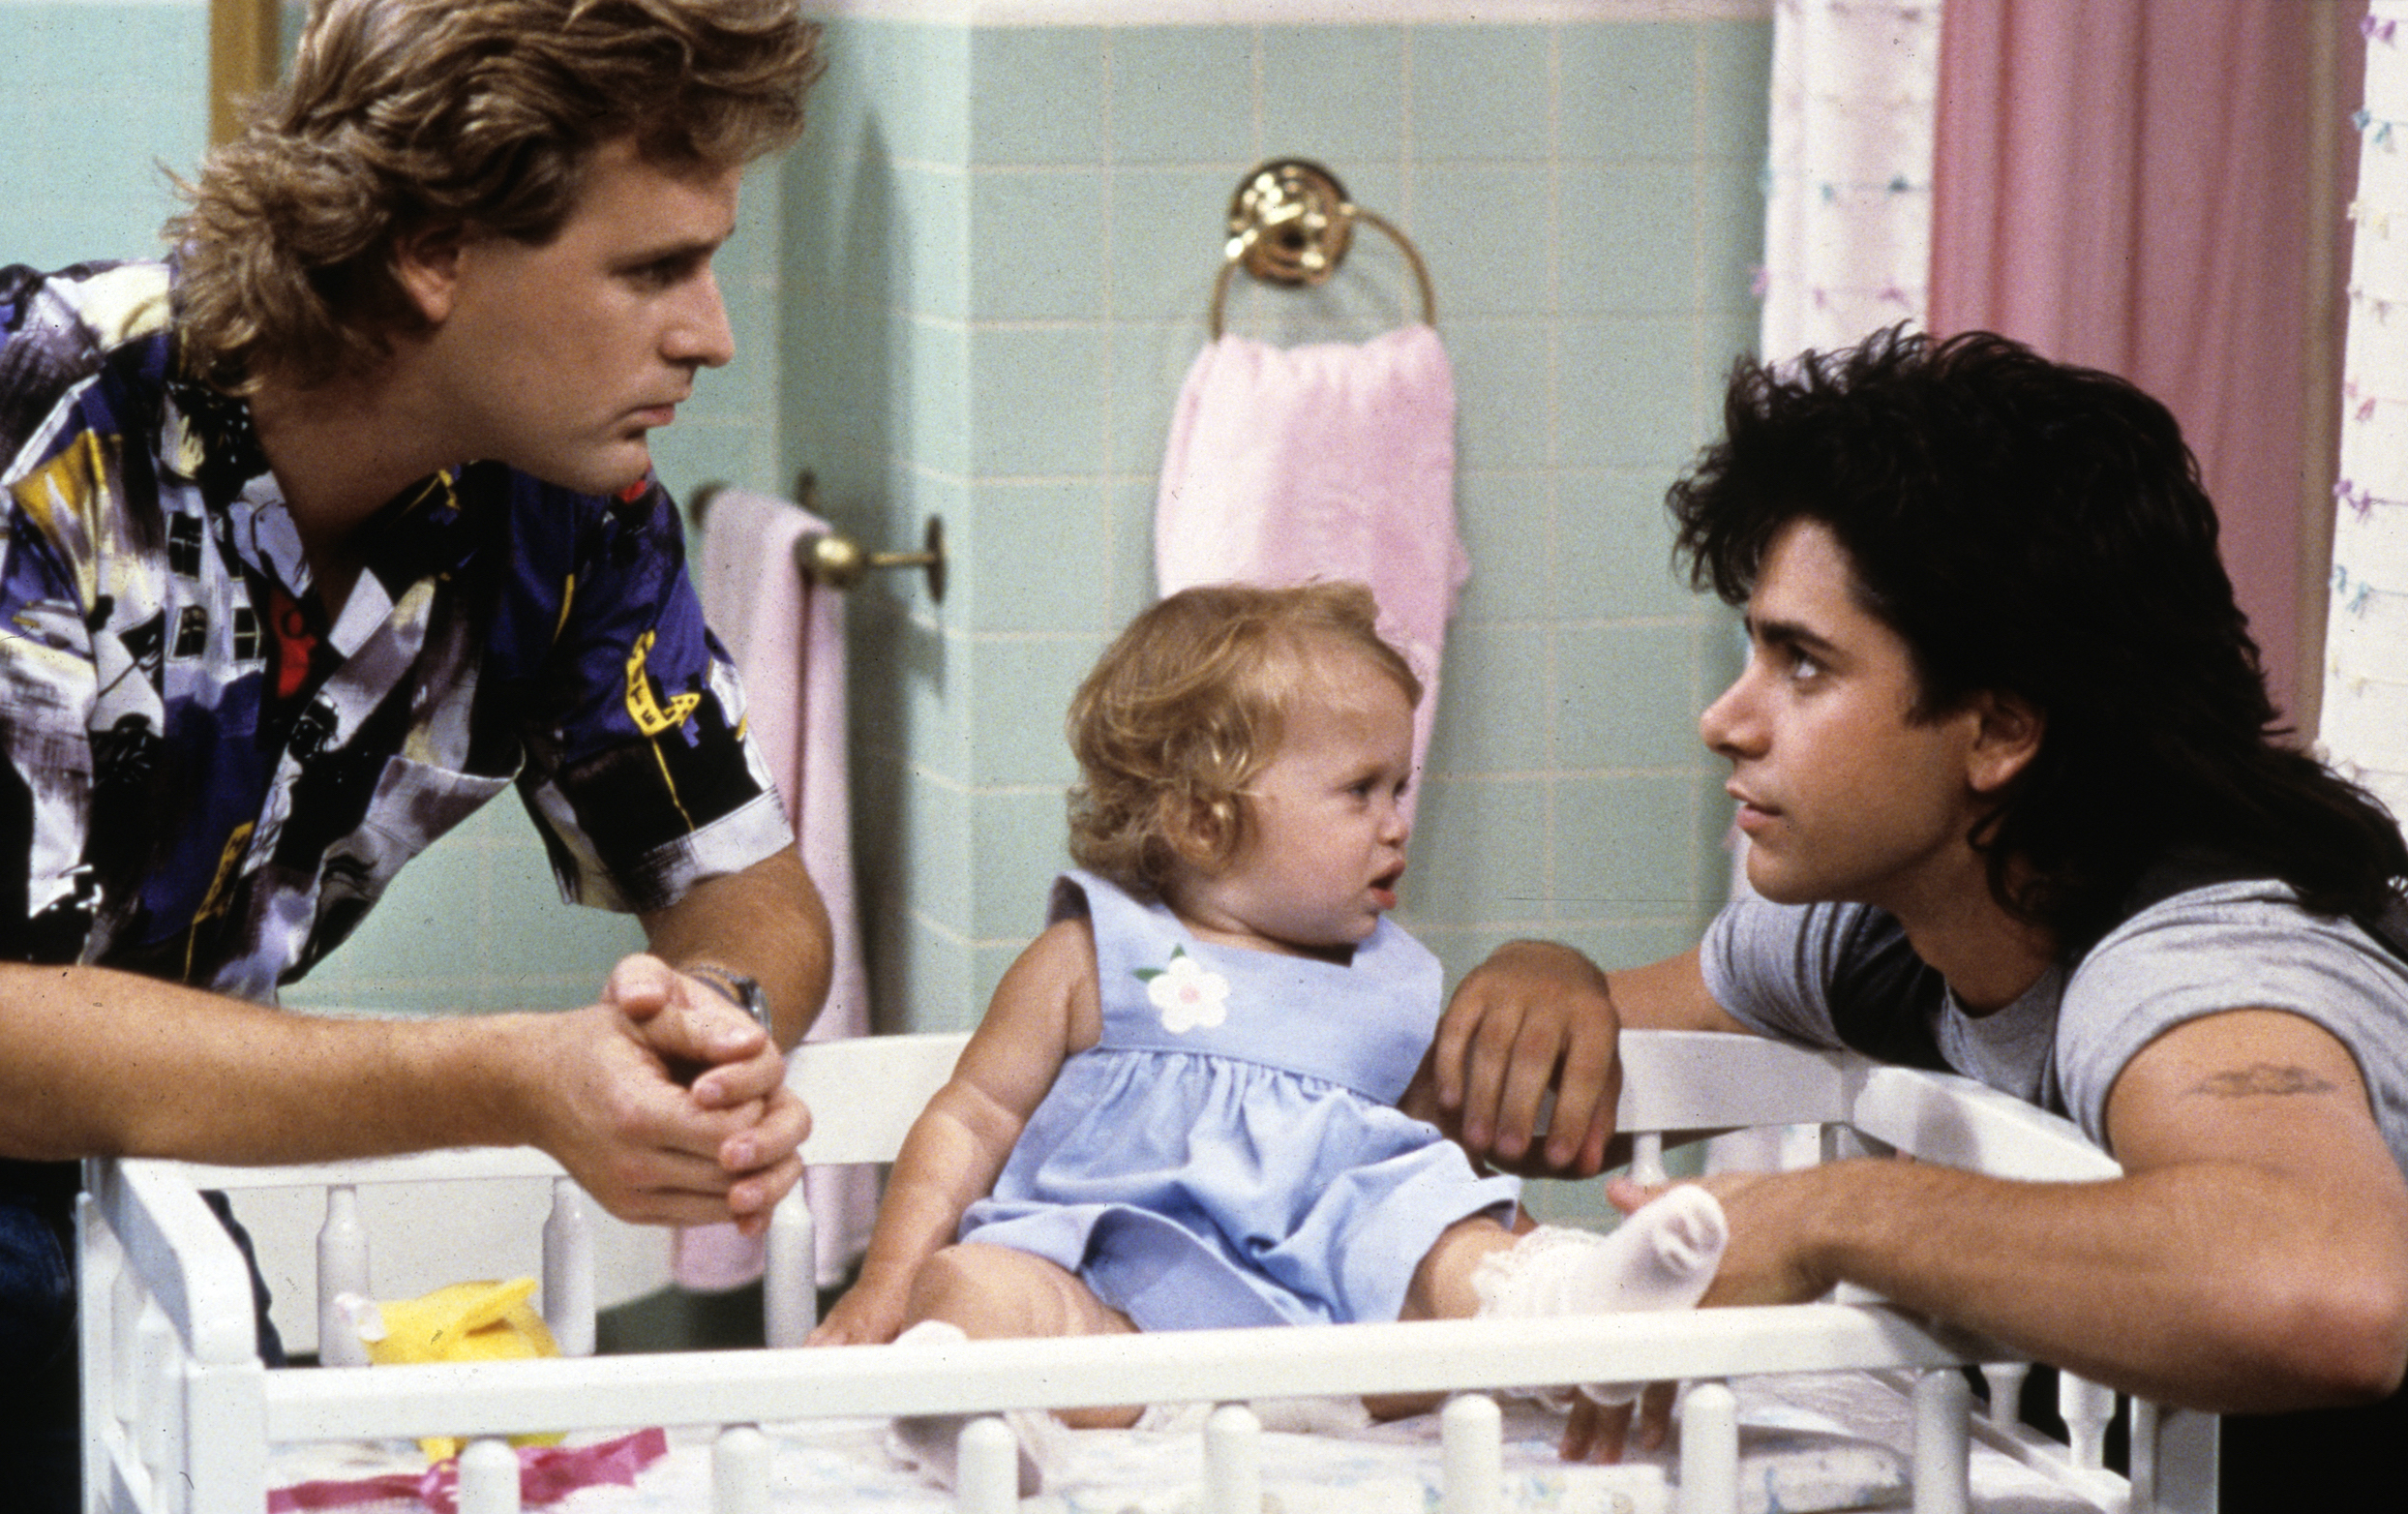 John Stamos Said He Got Olsen Twins Fired From ‘Full House’ When He ‘Couldn’t Deal’ With Constant Crying